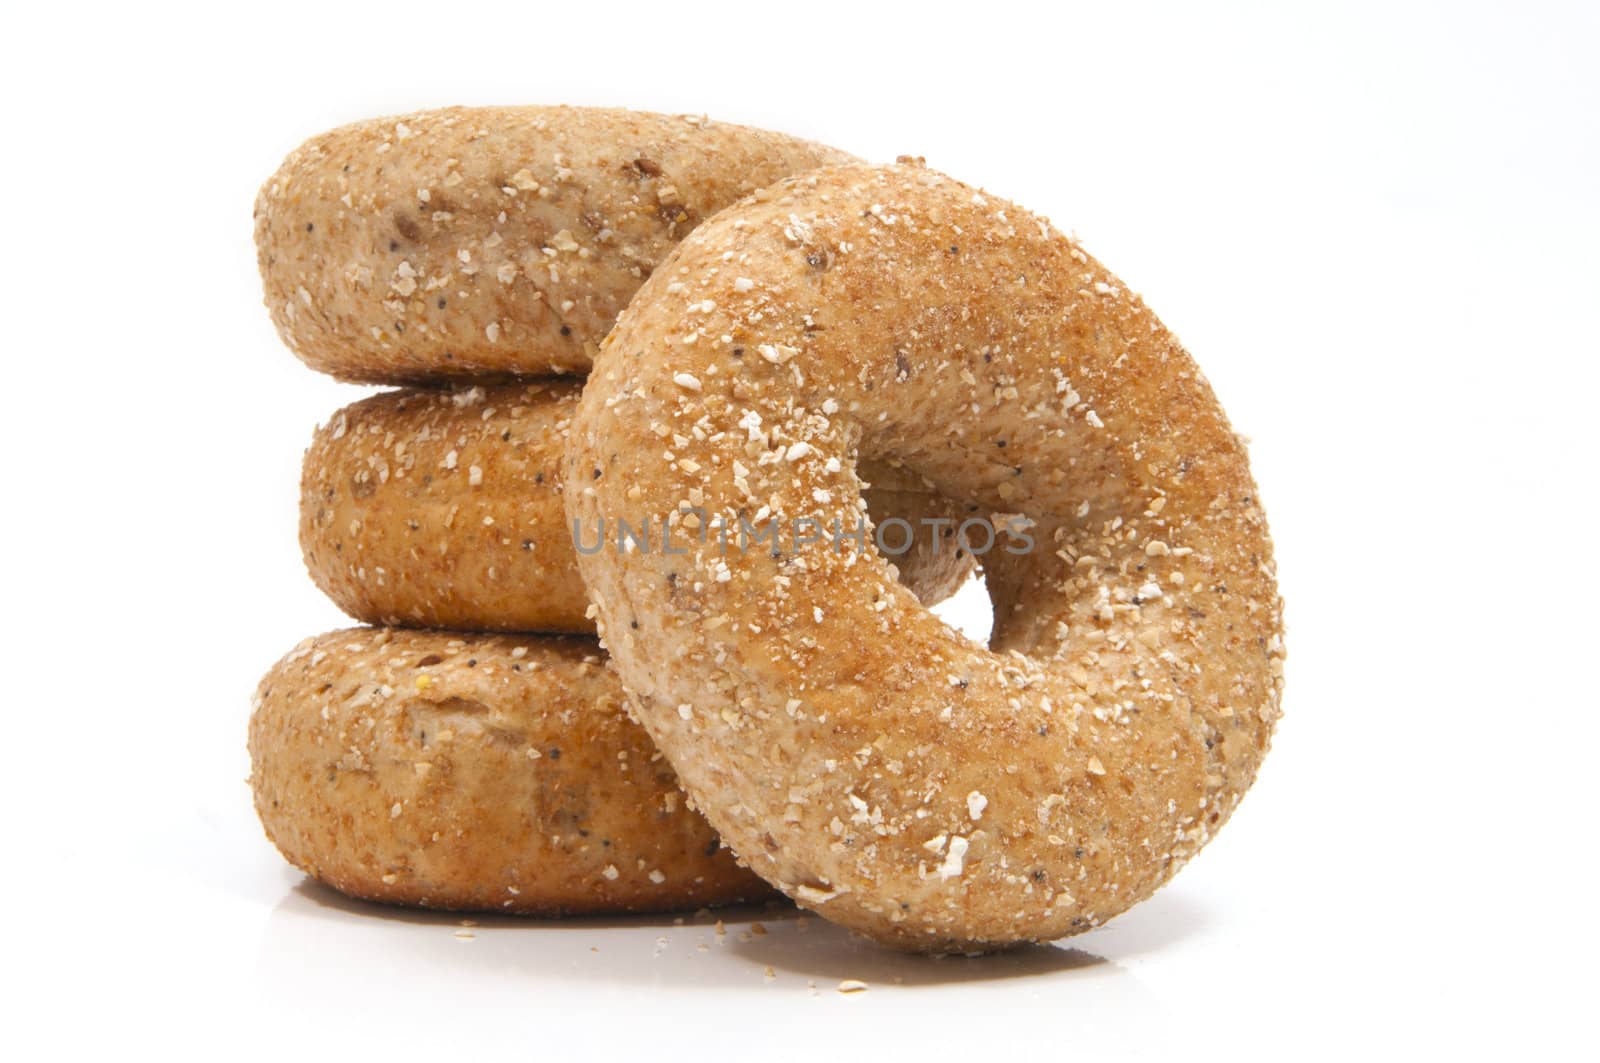 Four "Twelve Grain Bagels" with selective focus on the foreground bagel